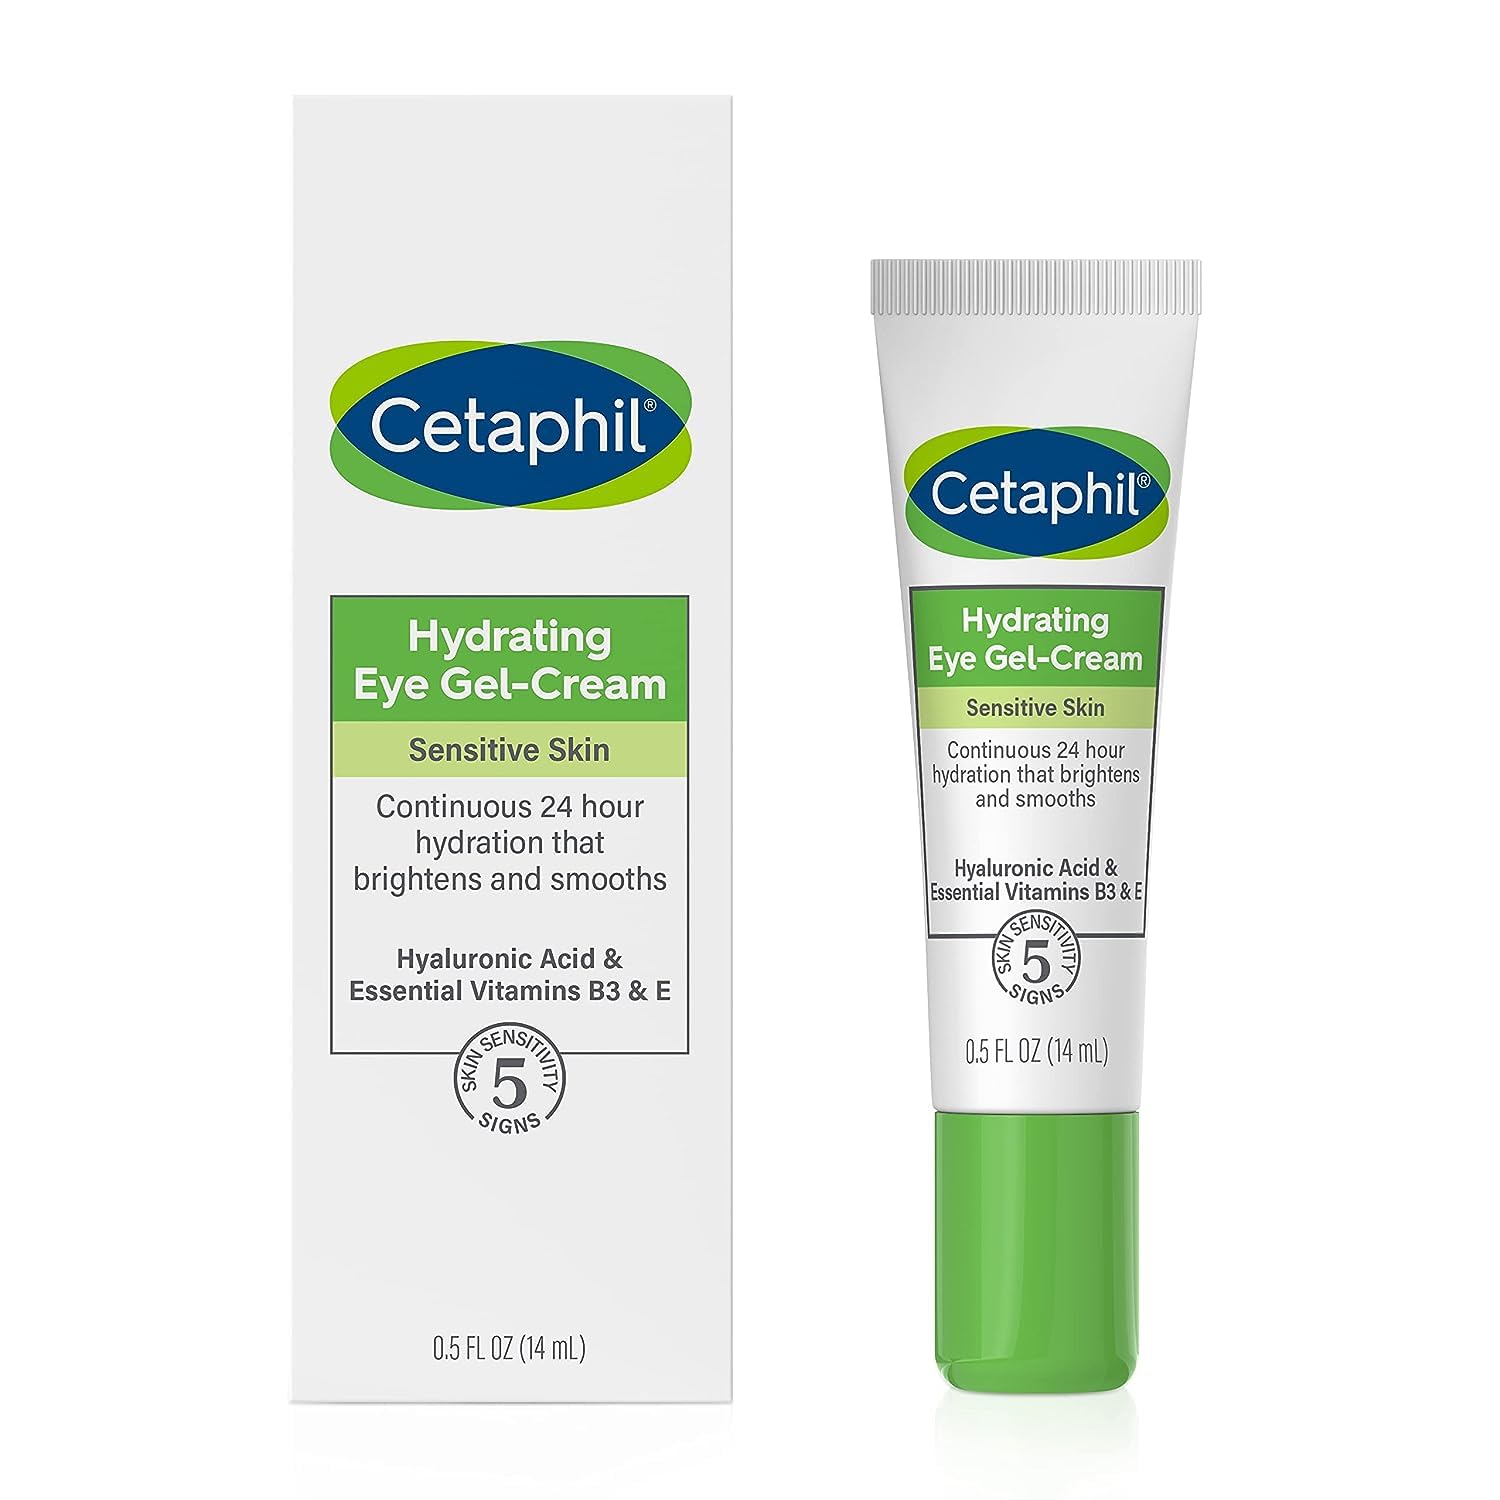 Cetaphil Hydrating Eye Gel-Cream, With Hyaluronic Acid, 0.5  , Brightens and Smooths Under Eyes, 24 Hour Hydration for All Skin Types, (Packaging May Vary)